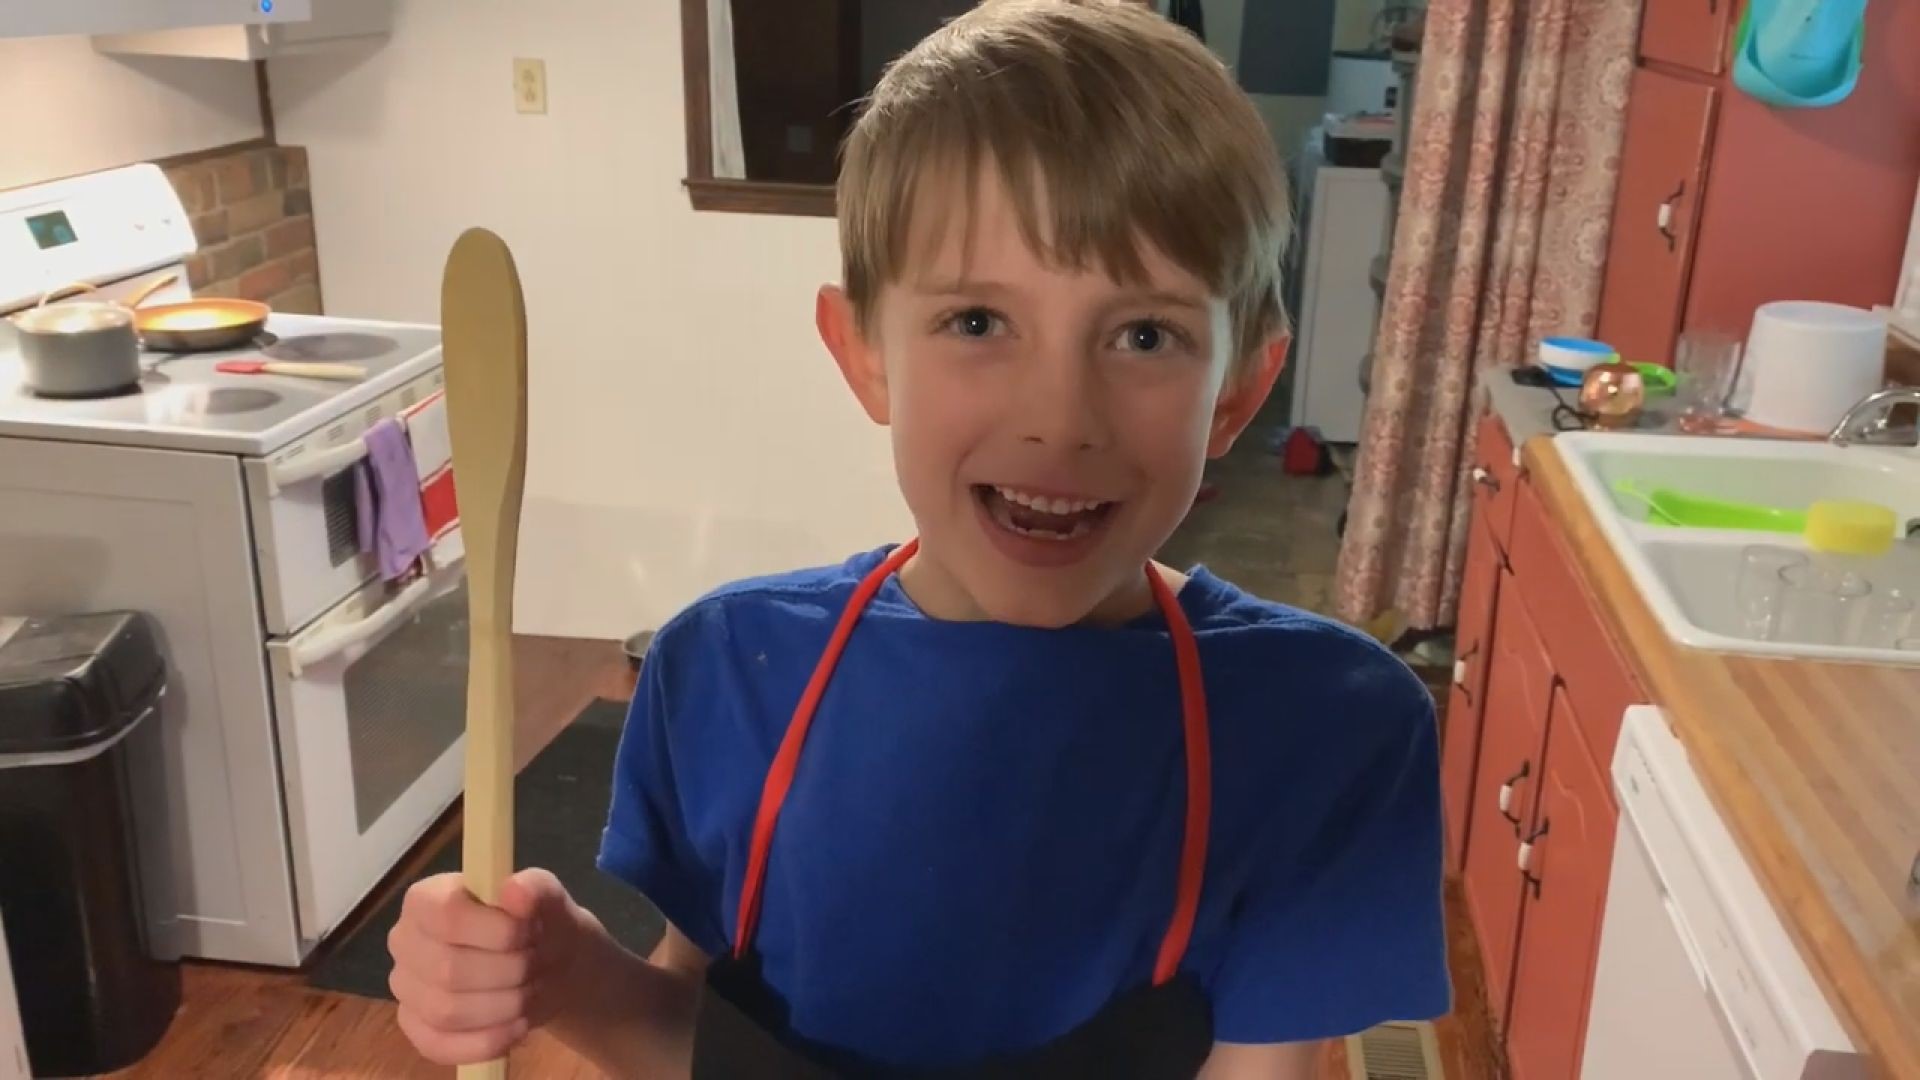 A Baldwin County 7-year-old is encouraging his peers to stay creative during the coronavirus pandemic by making ‘Quarantine Fun with Gavin' tutorial videos